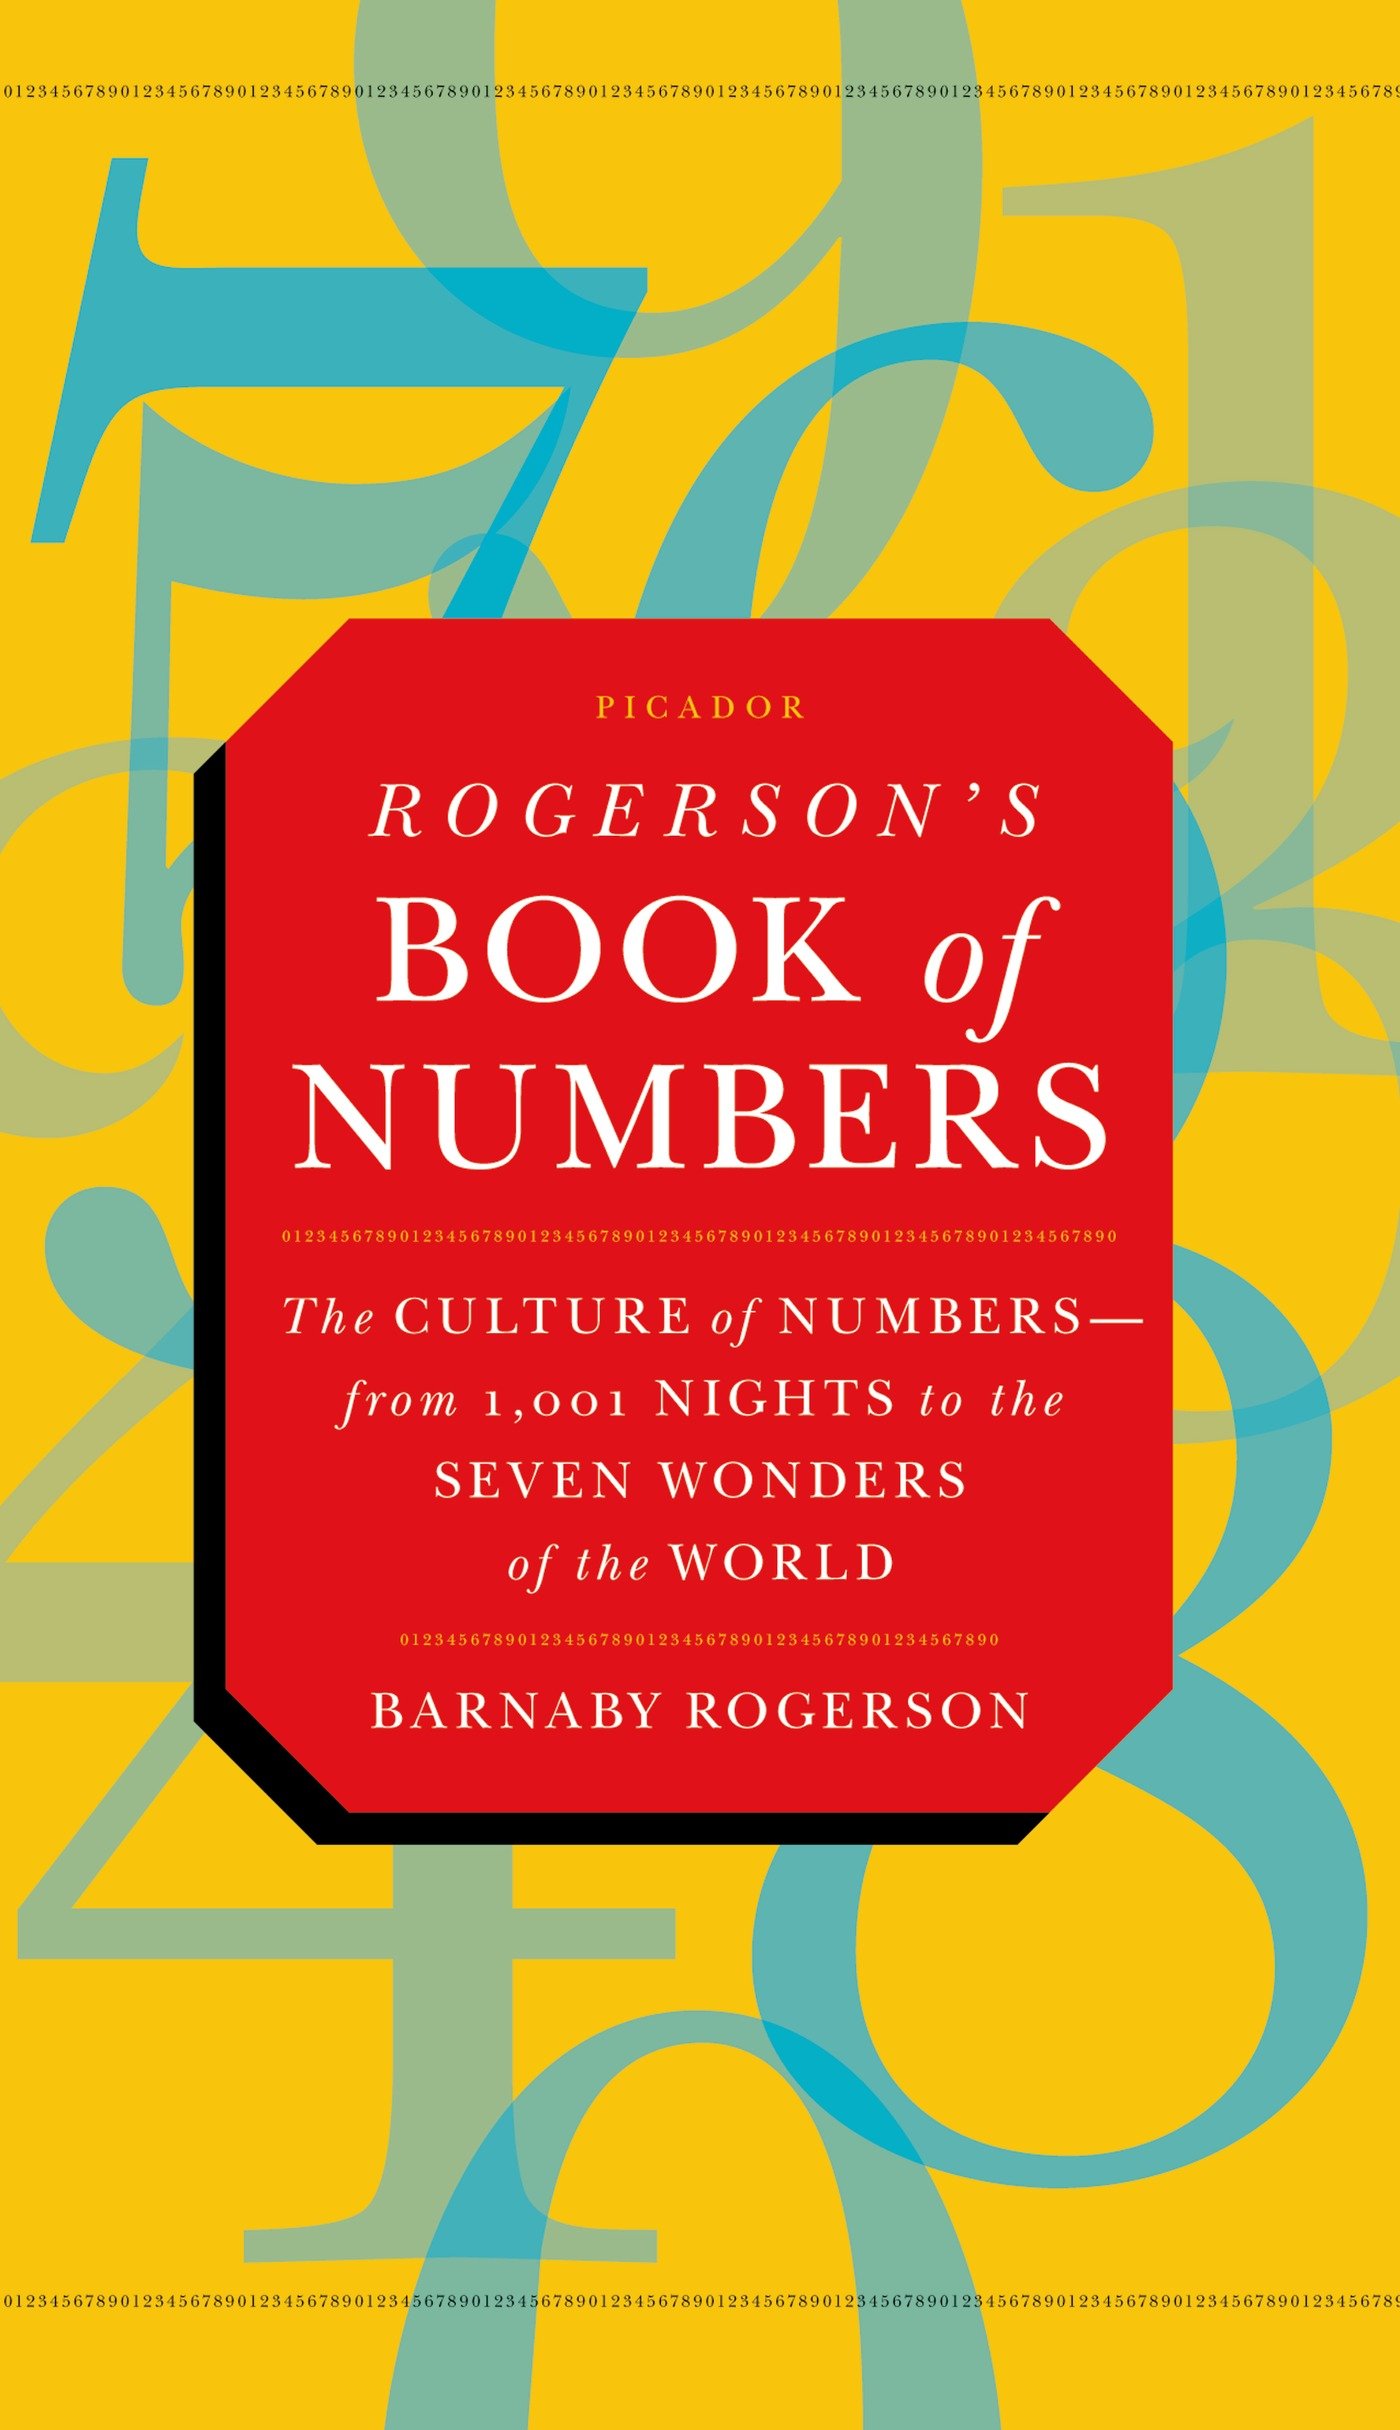 Rogerson’s Book of Numbers